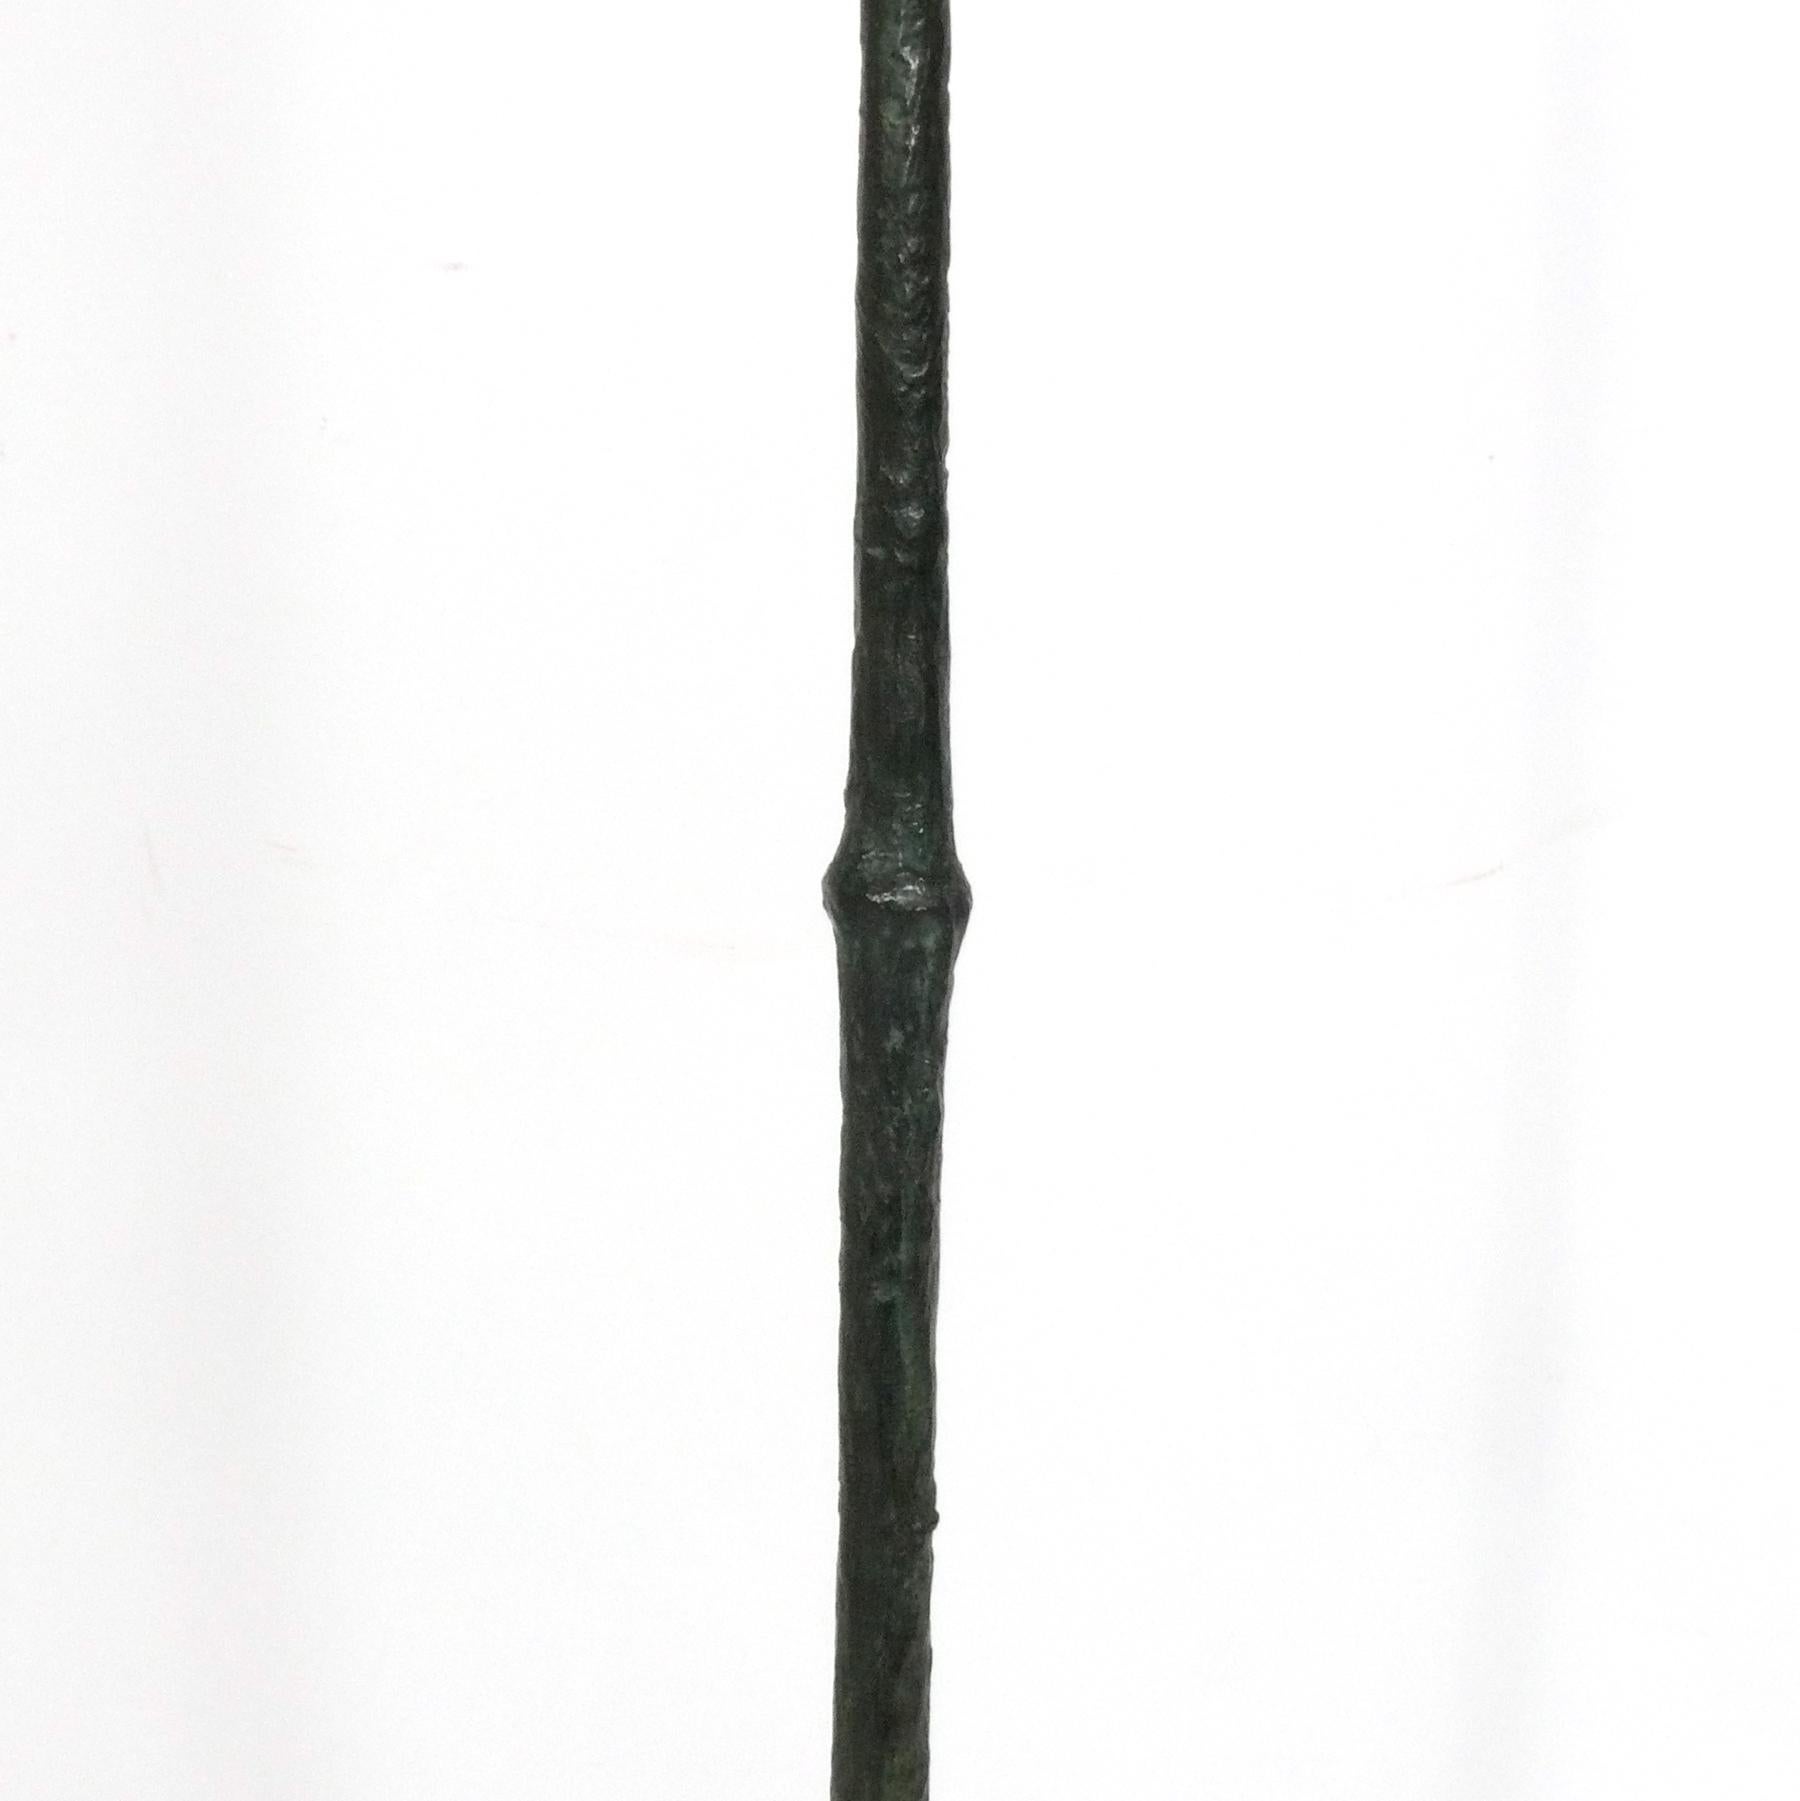 Sculptural bronze floor lamp, in the style of Diego Giacometti, French, circa 1970s. We are unsure if this is constructed of bronze, or a bronze finished metal with a verdigris patina. It has been rewired and is ready to use. The base measures